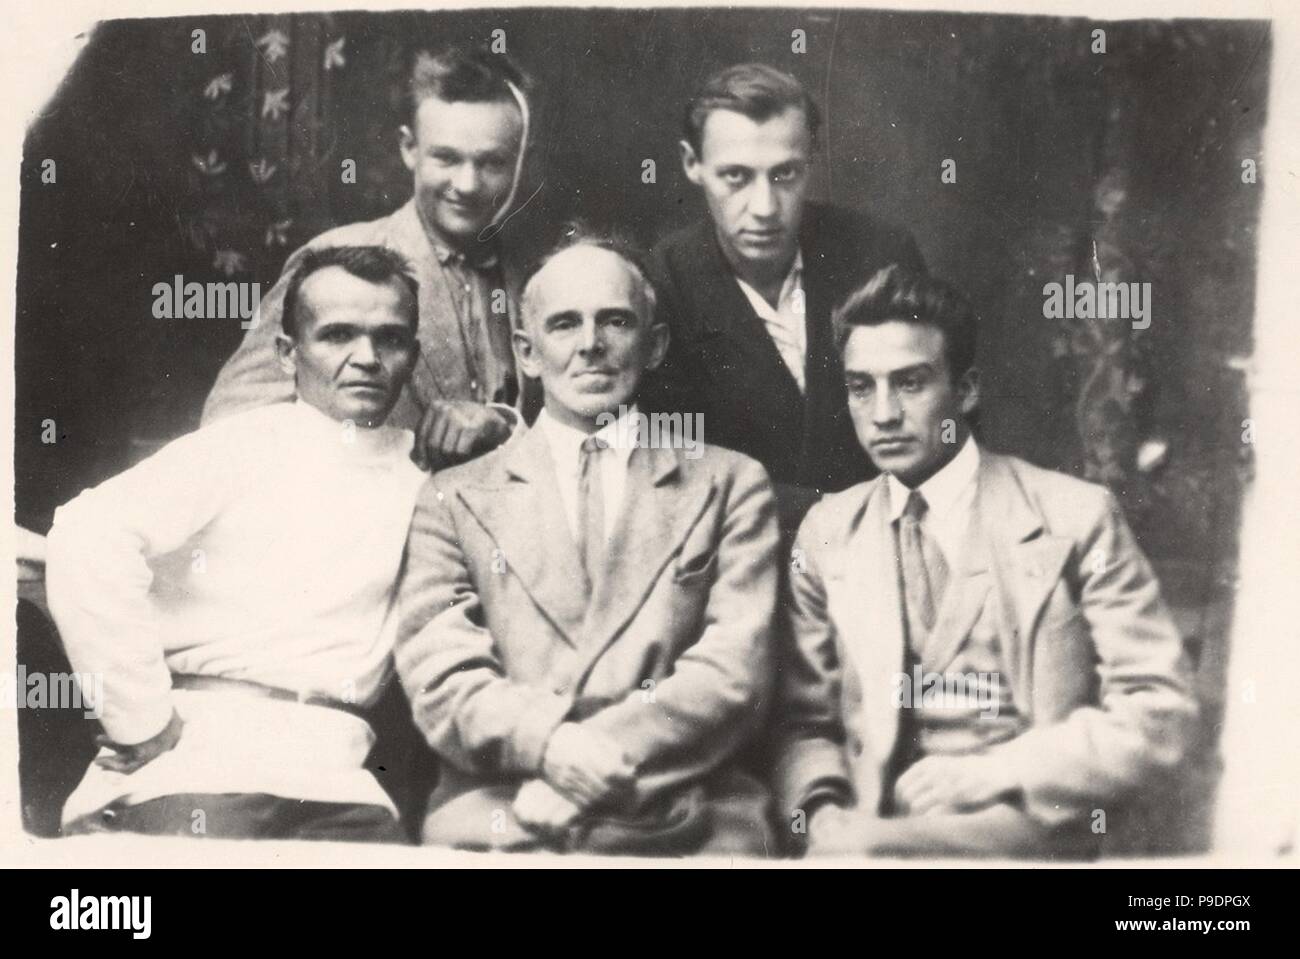 Osip Mandelstam (1891-1938) at a Sanatorium in Tambov. Museum: Russian State Archive of Literature and Art, Moscow. Stock Photo